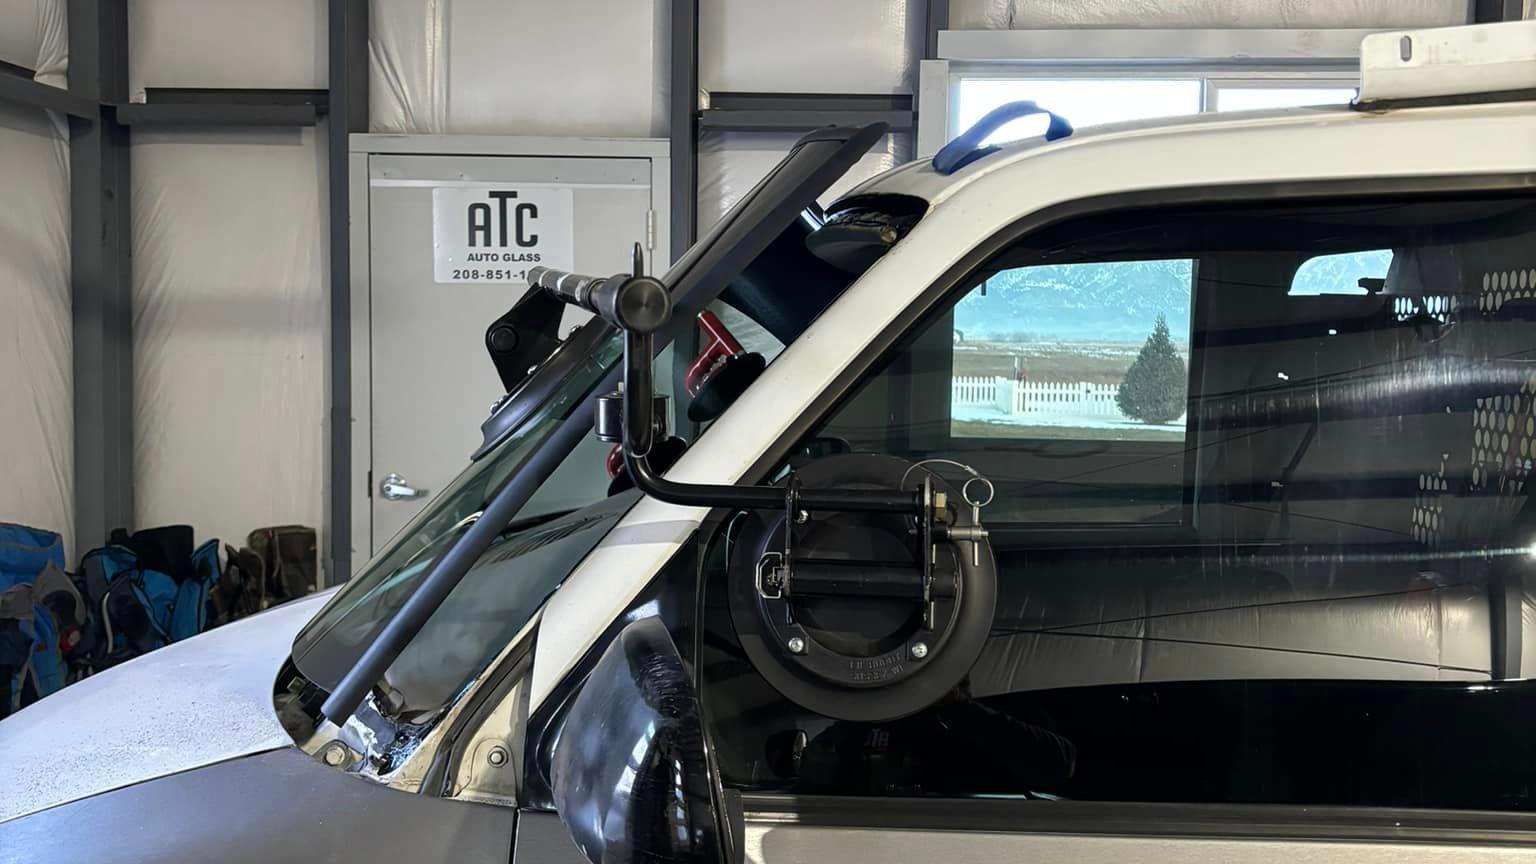 ATC Auto Glass specializes in high-quality auto glass repair services, skillfully addressing chips, cracks, and minor damages to restore the integrity of your vehicle's glass. Our hands-on owner ensures precision and professionalism, making your safety our top priority.